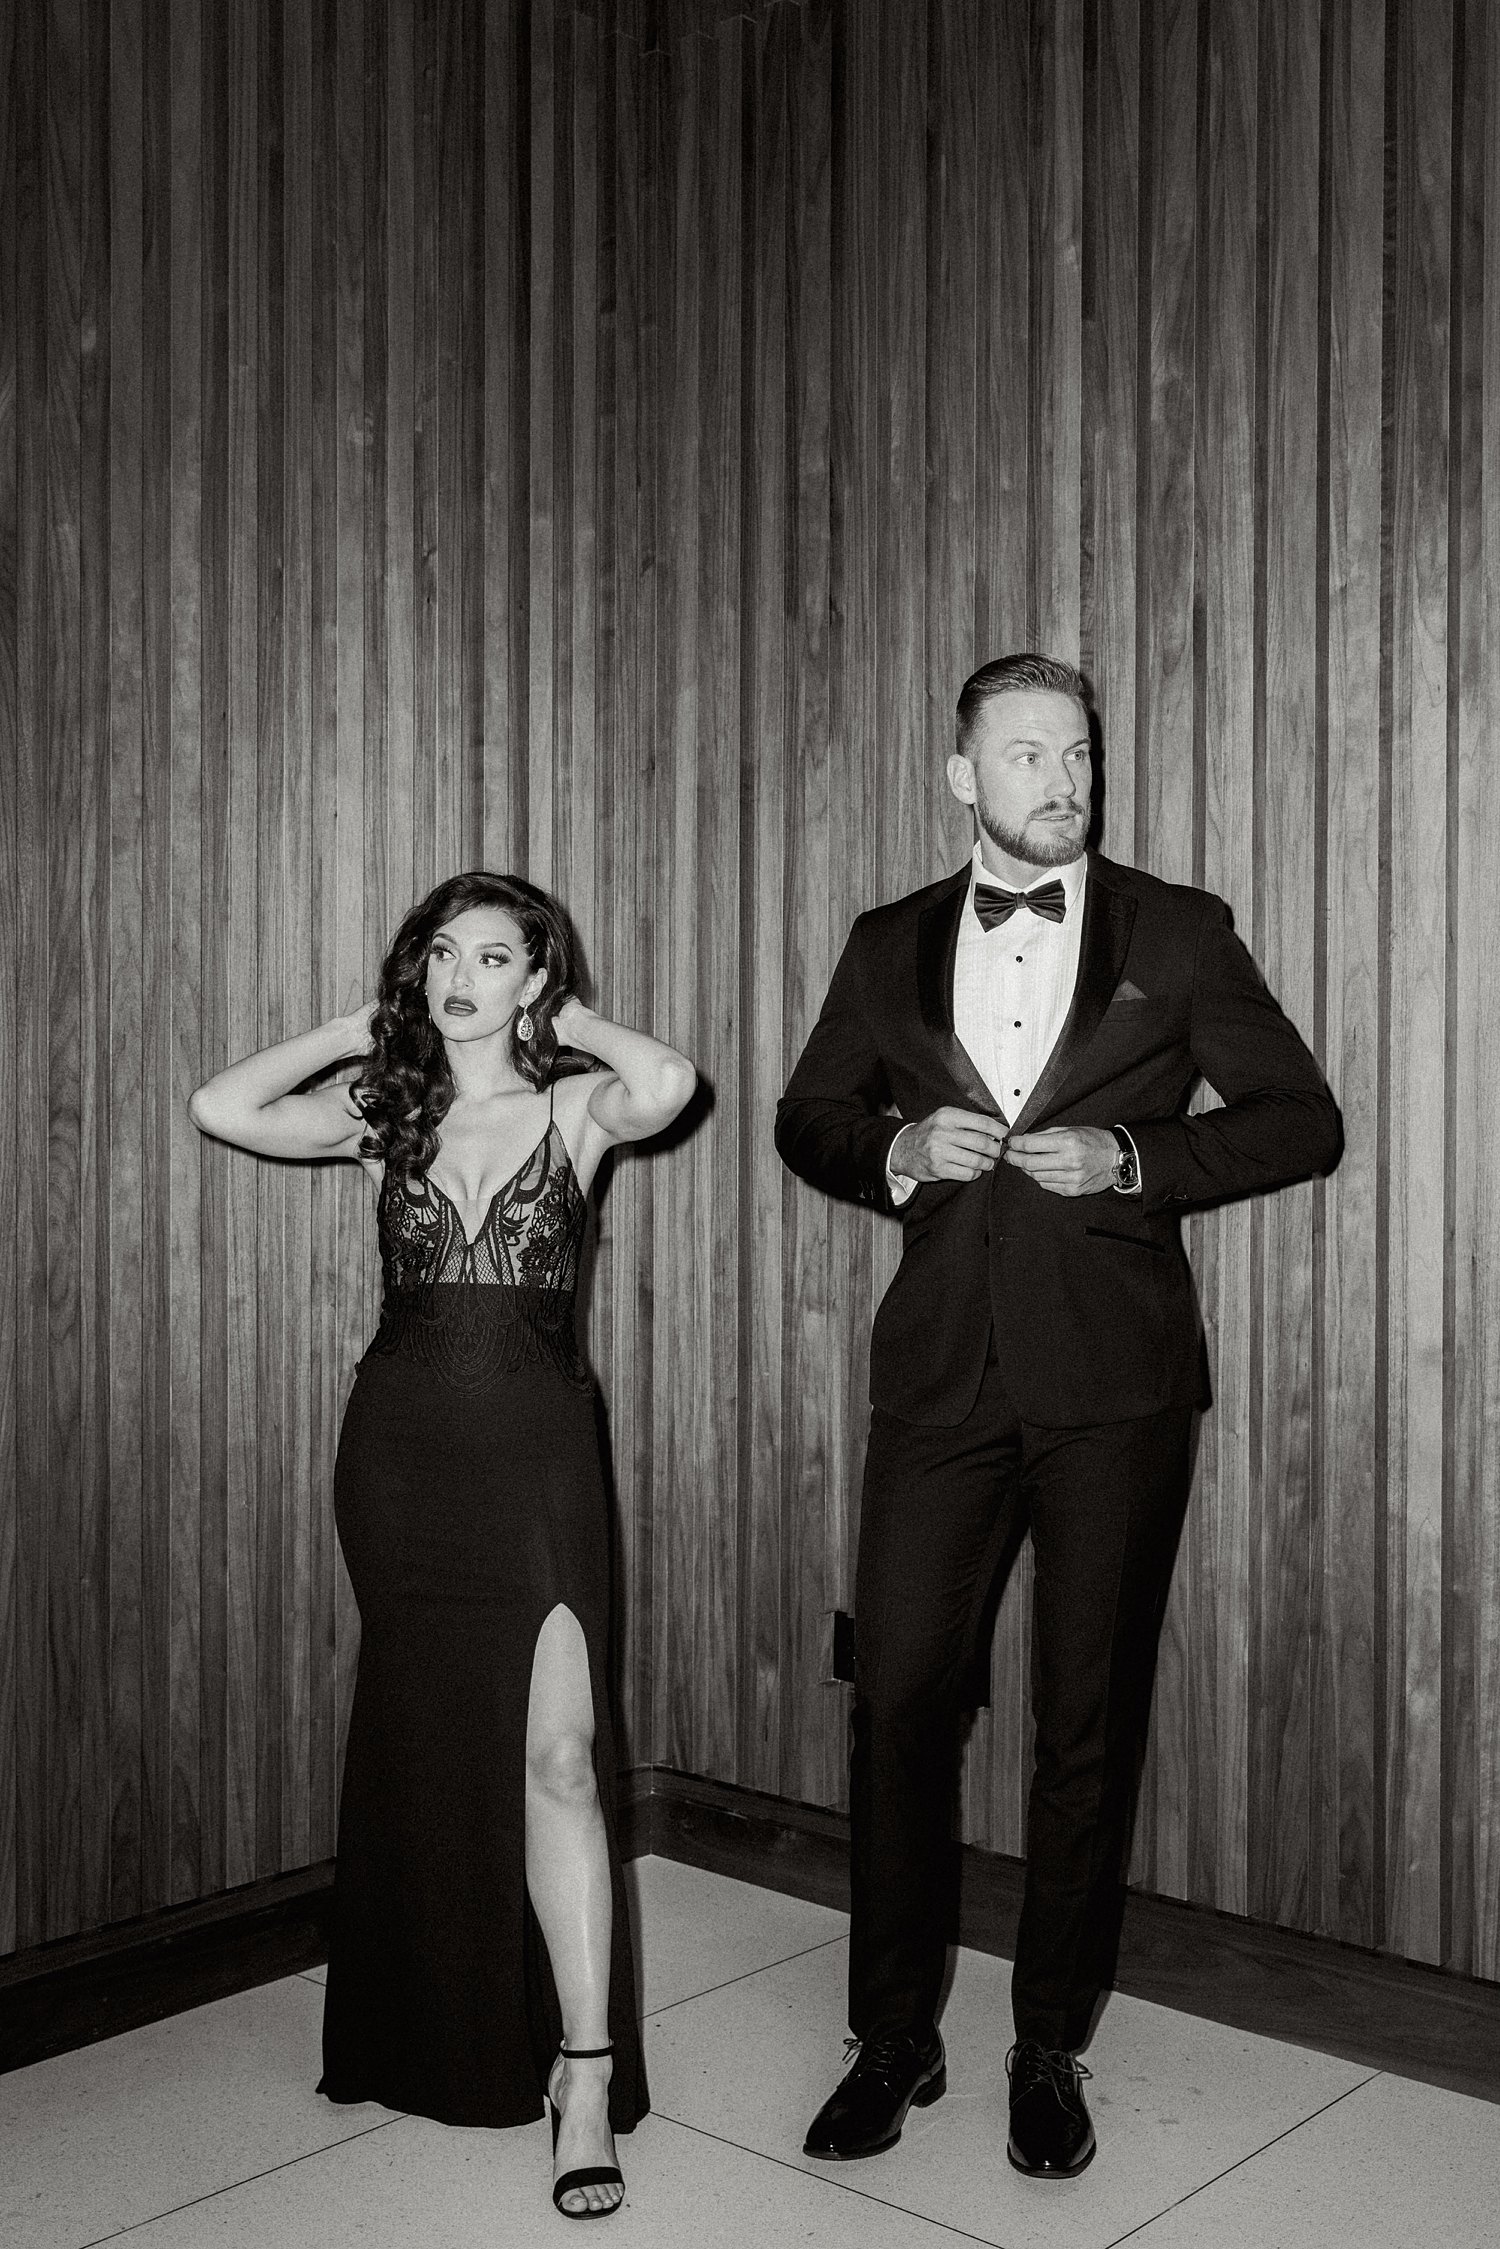 Woman in black dress and man in tuxedo standing in front of wood paneled wall